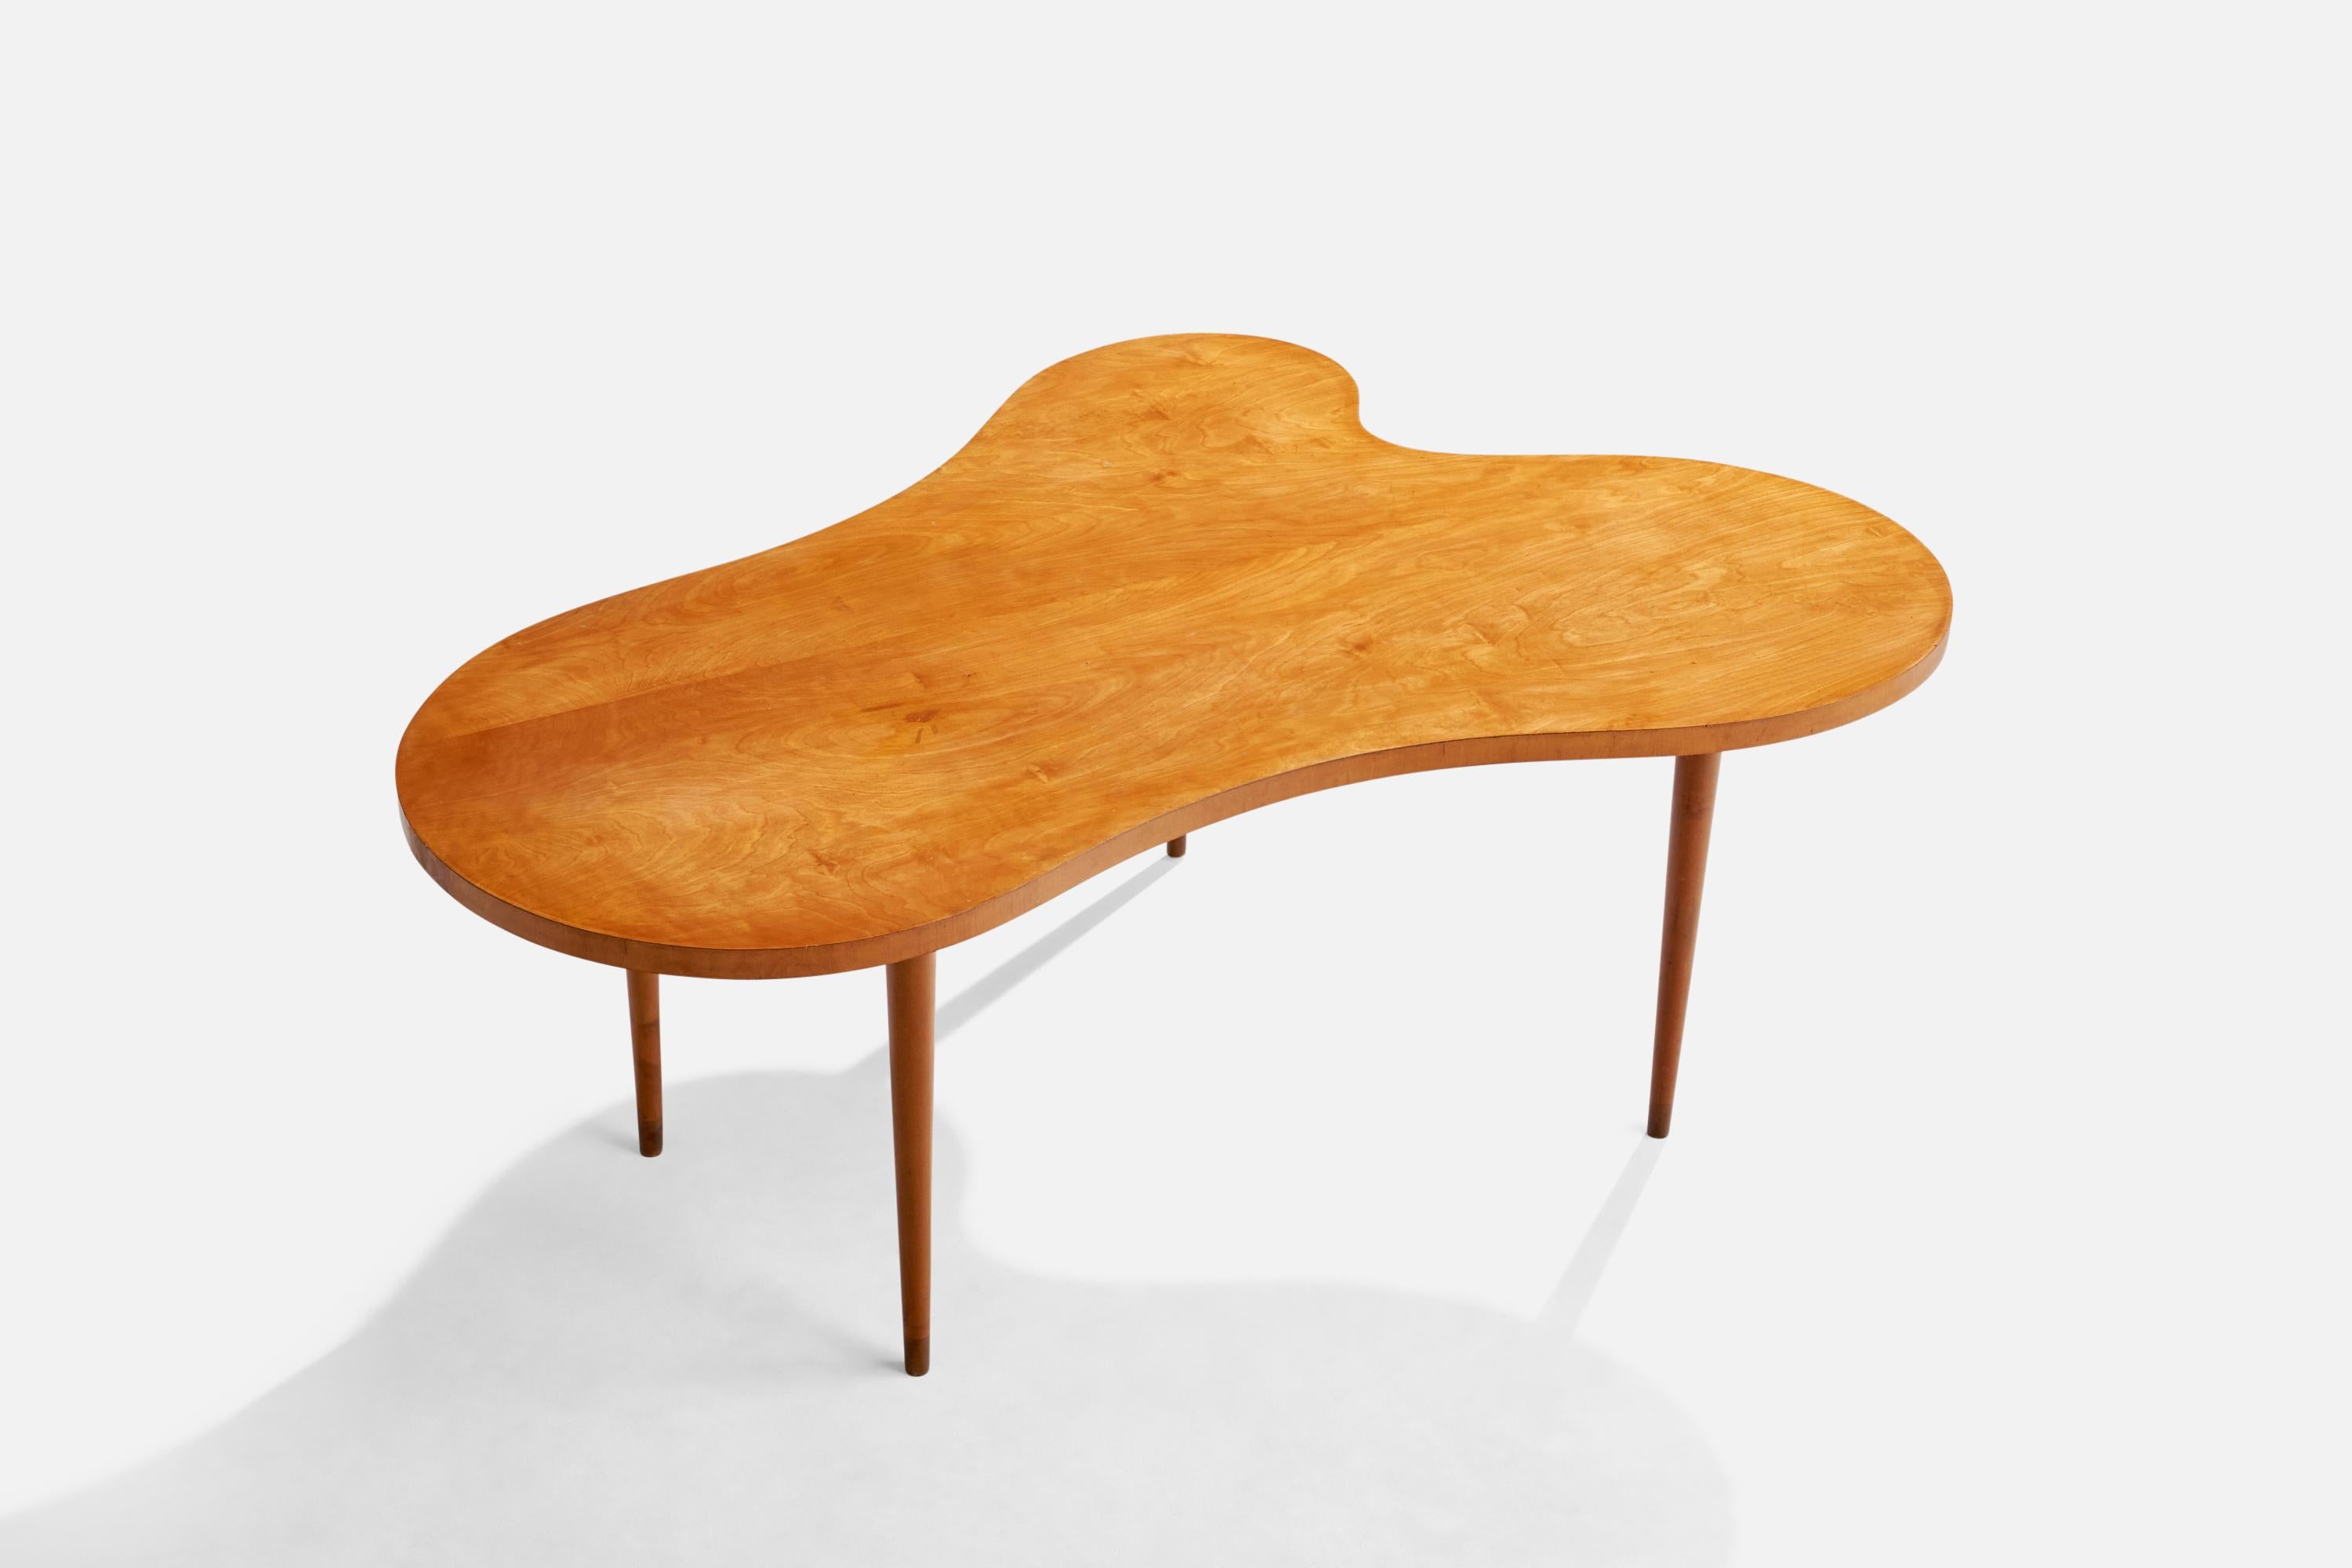 An organic birch table designed by American designed Edmond Spence and produced in Sweden, 1950s.